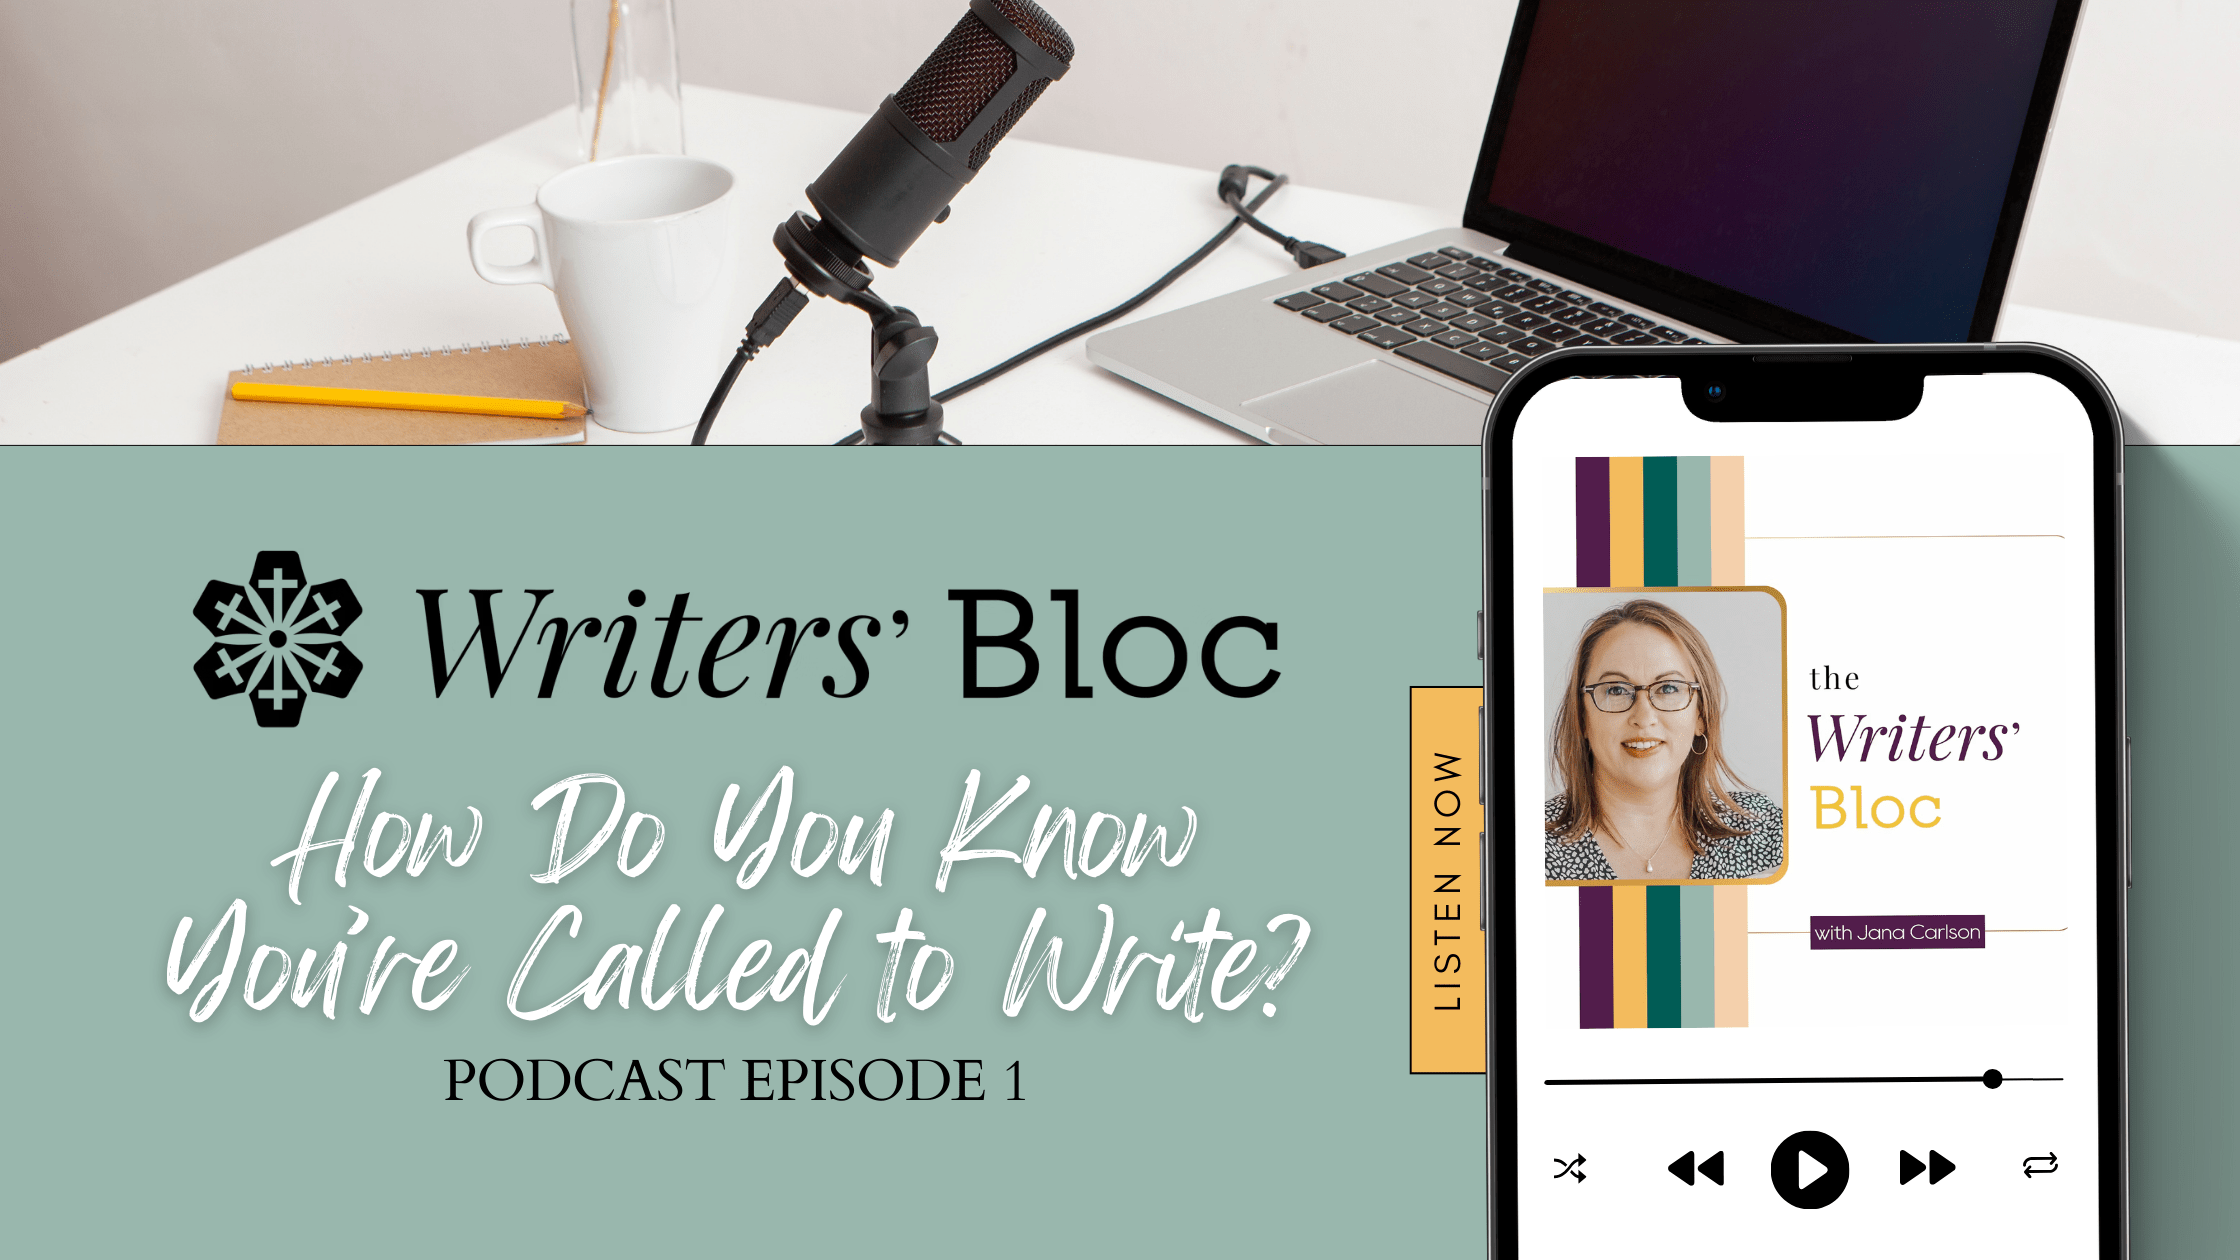 The Writers Bloc Podcast: How Do You Know You're Called to Write? with Jana Carlson